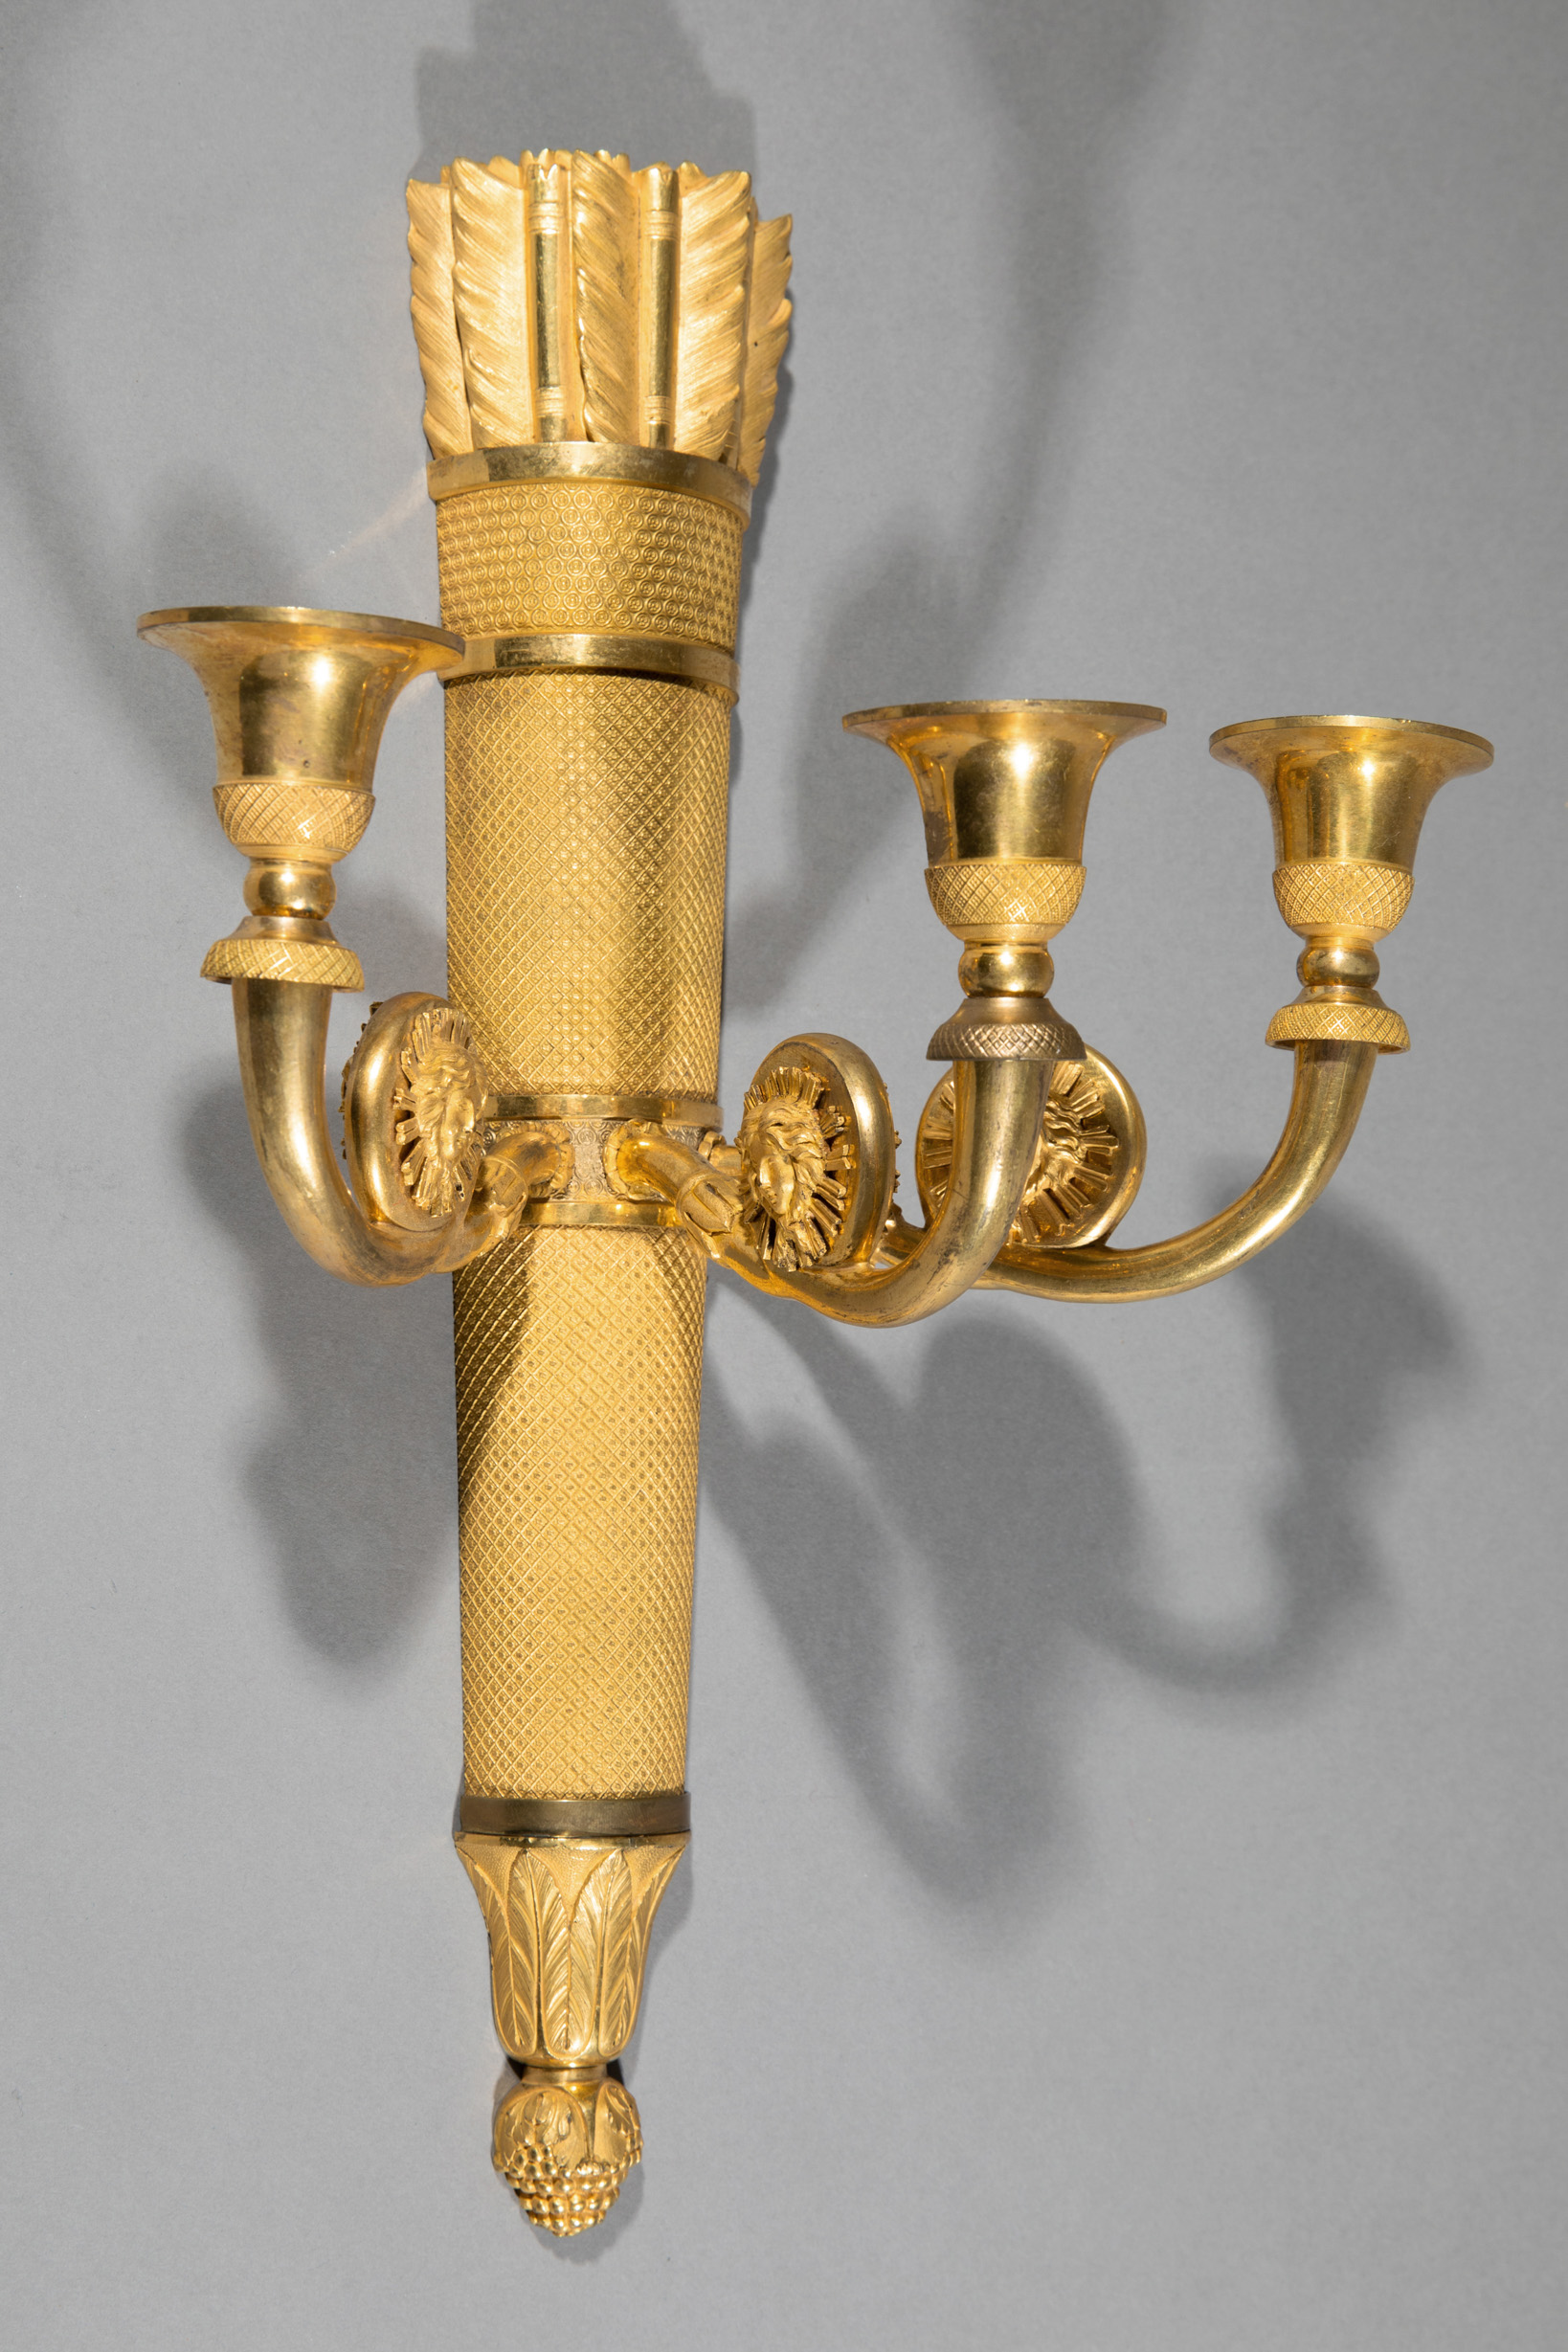 Louis Seize wall sconce, fire-gilded bronze